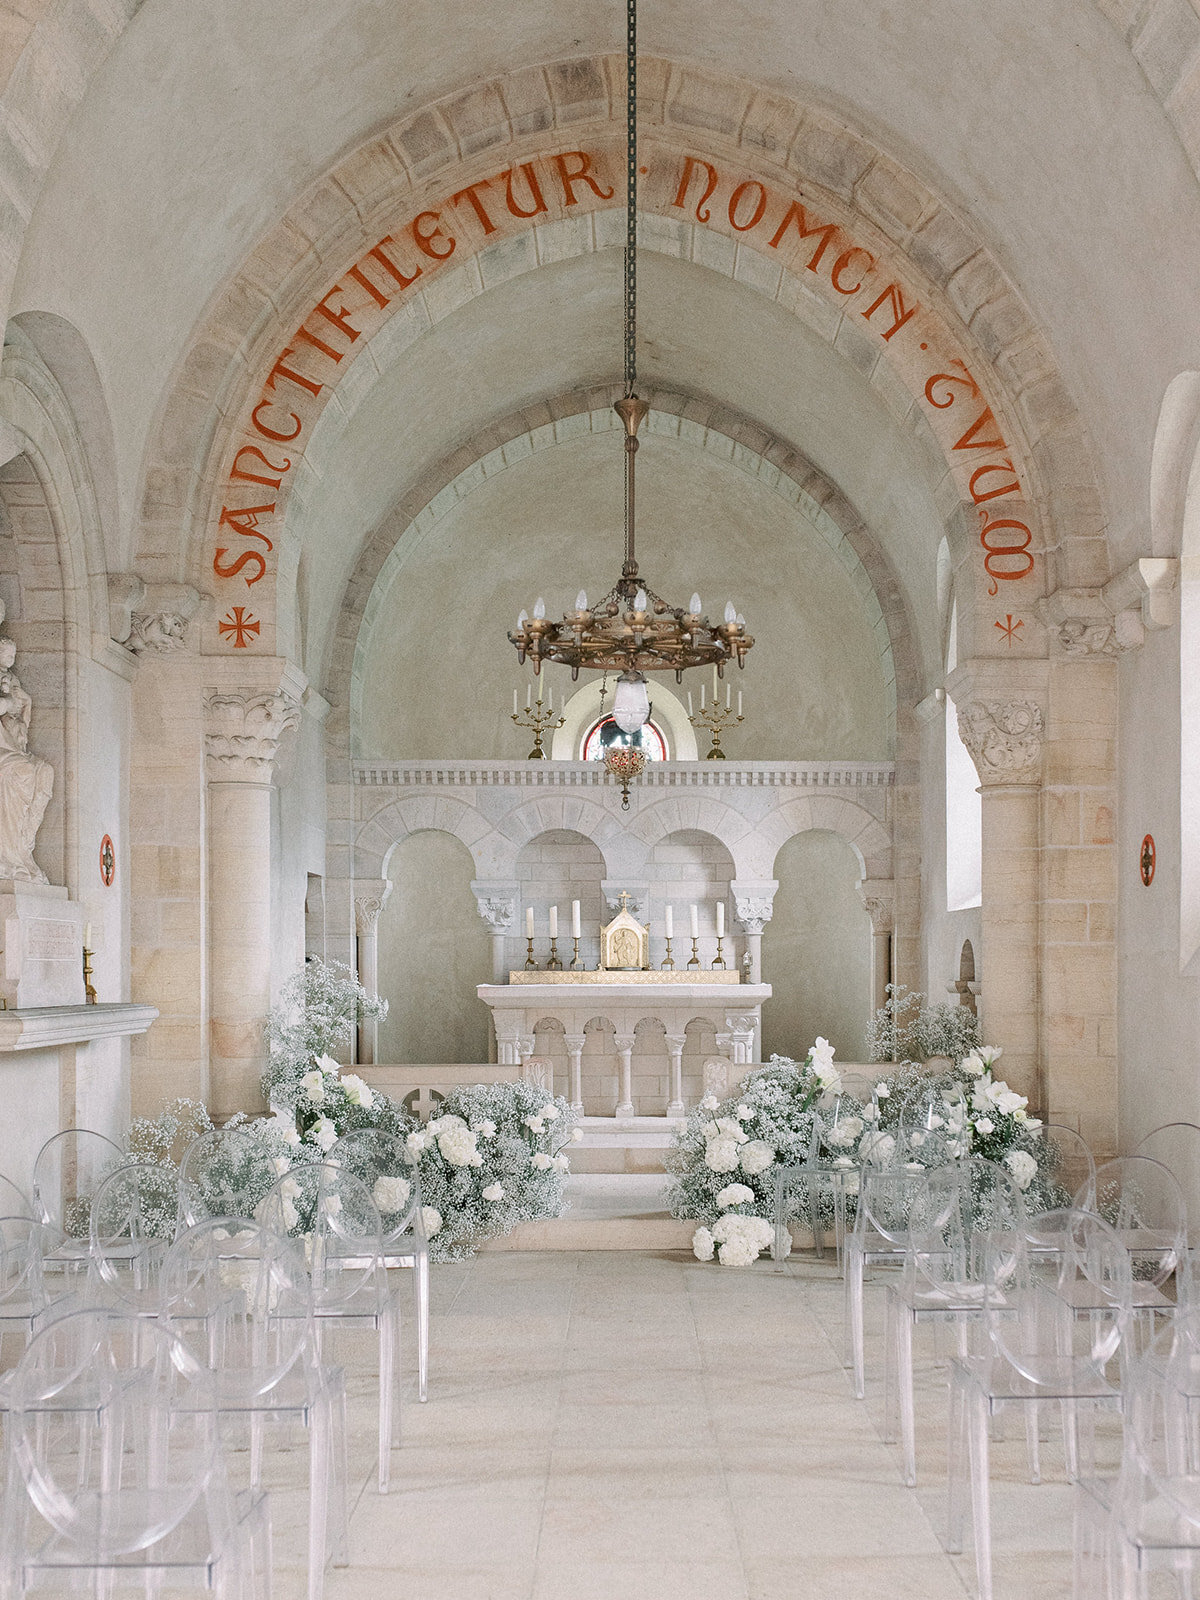 Jennifer Fox Weddings English speaking wedding planning & design agency in France crafting refined and bespoke weddings and celebrations Provence, Paris and destination Chateau_de_Varennes_-_Harriette_Earnshaw_Photography-1